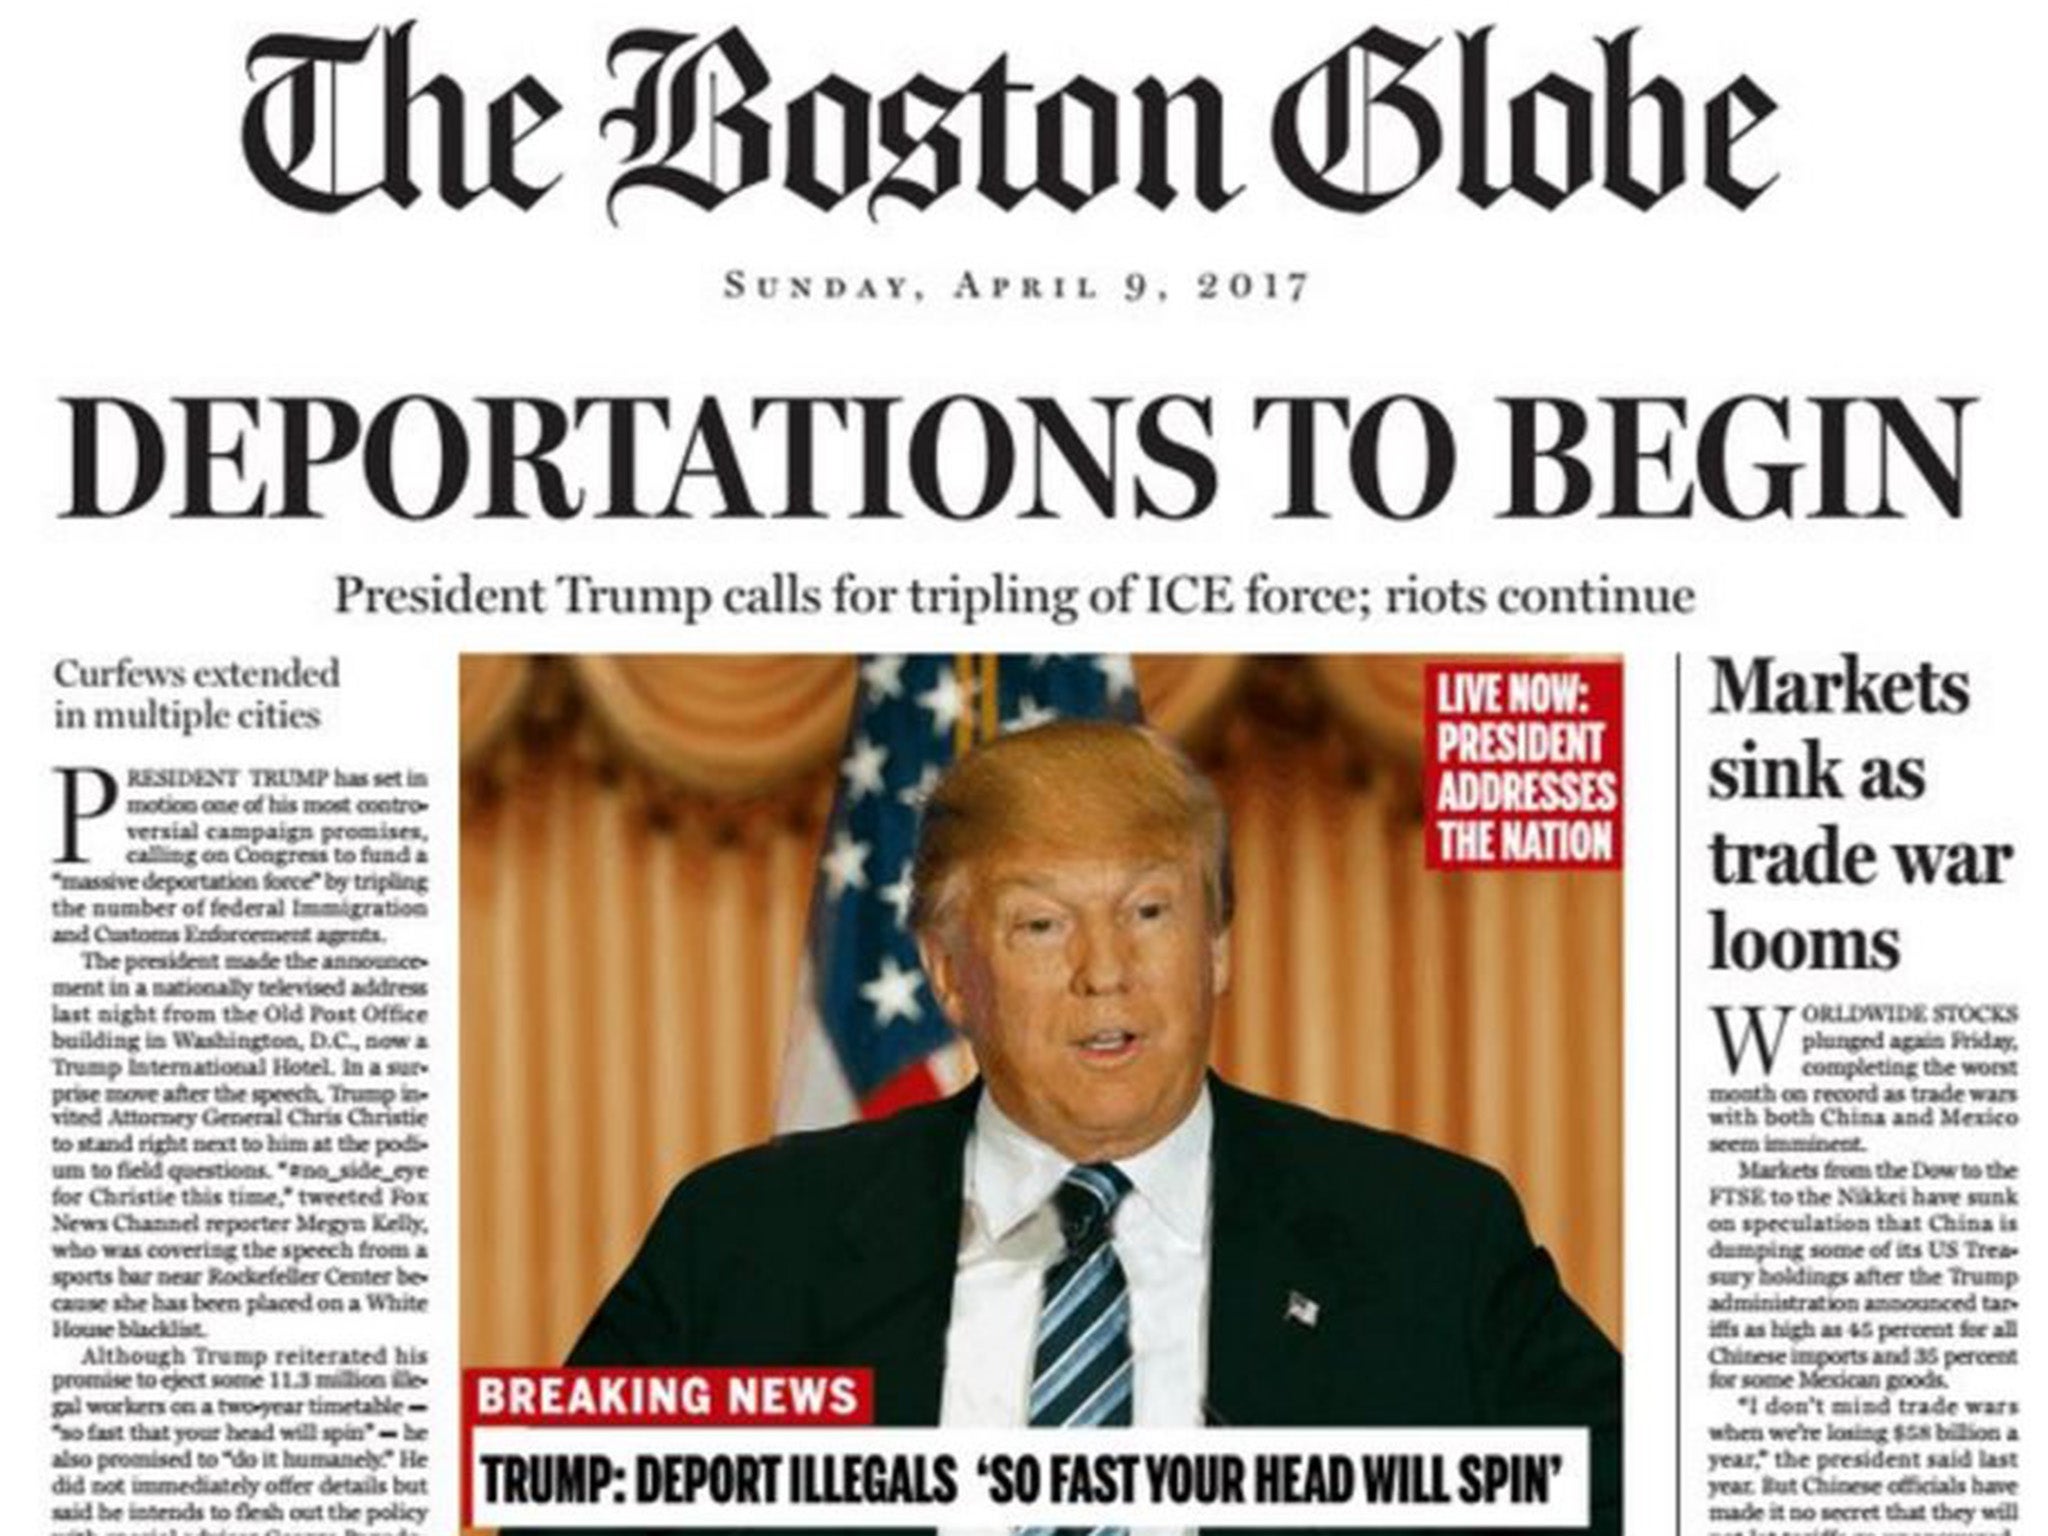 Donald Trump's campaign promises are imagined as actual policy in the mocked-up front page